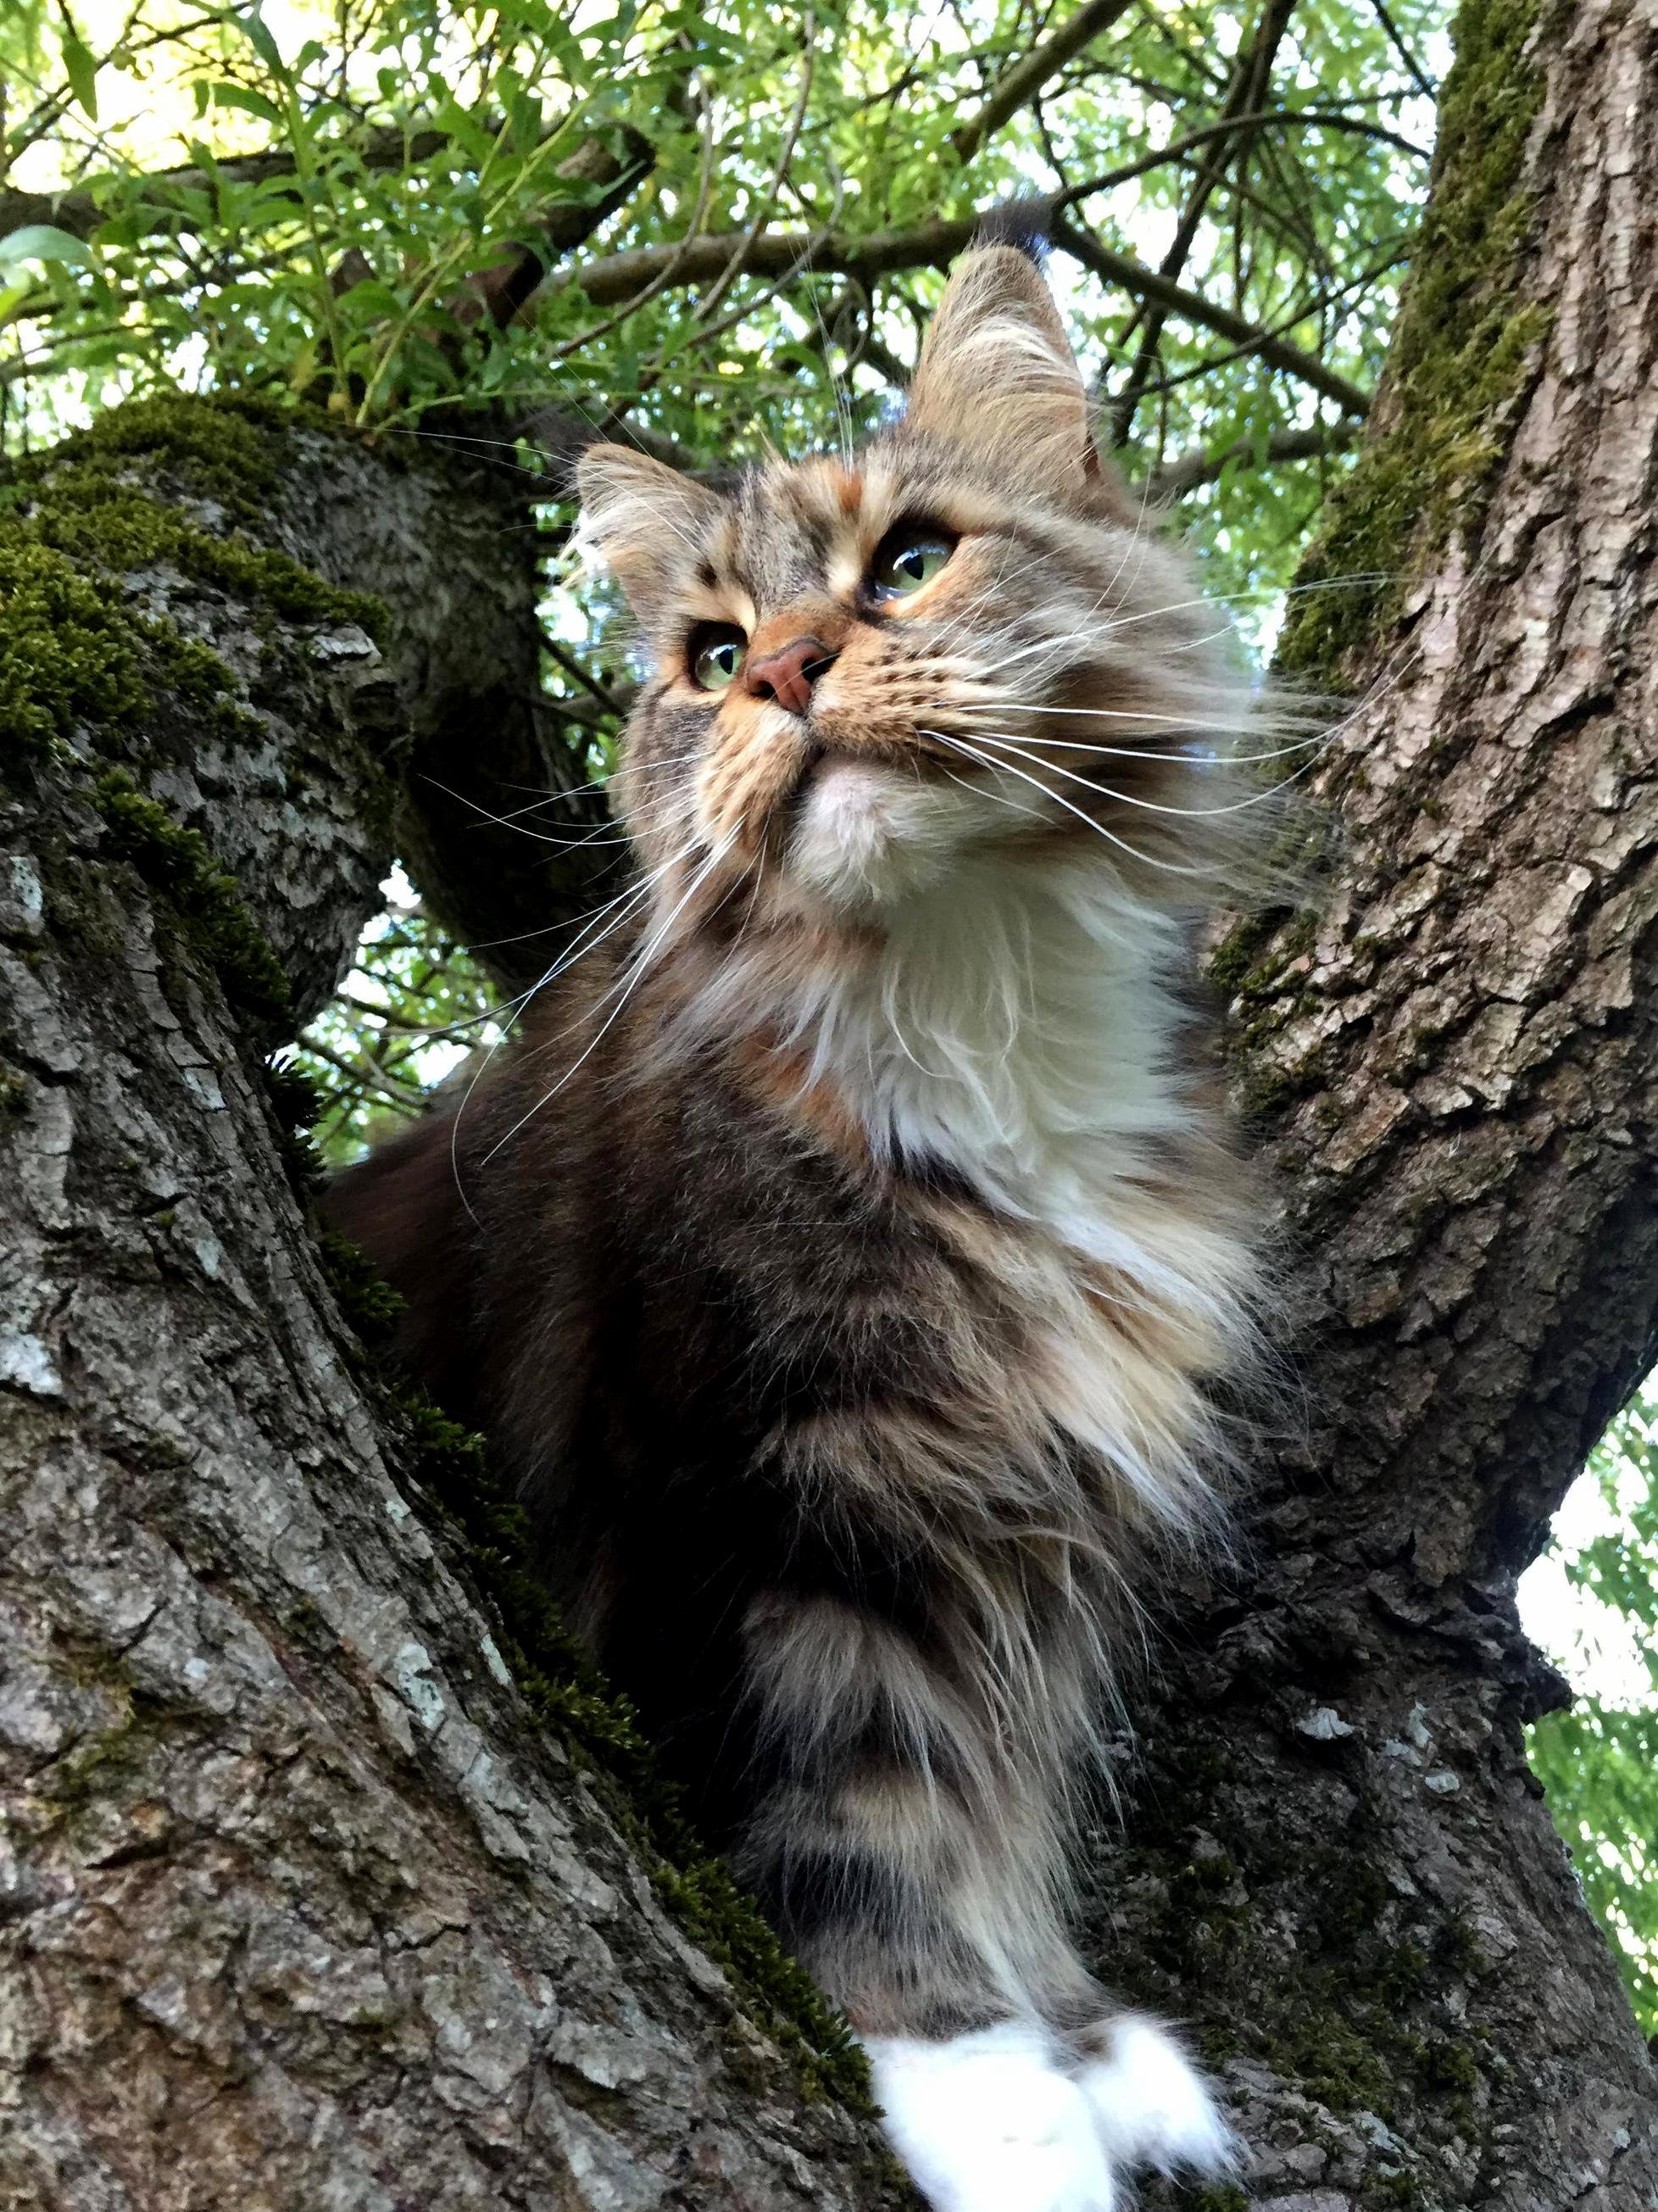 My cat Beatrice effortlessly photogenic maine coon fool that she is.